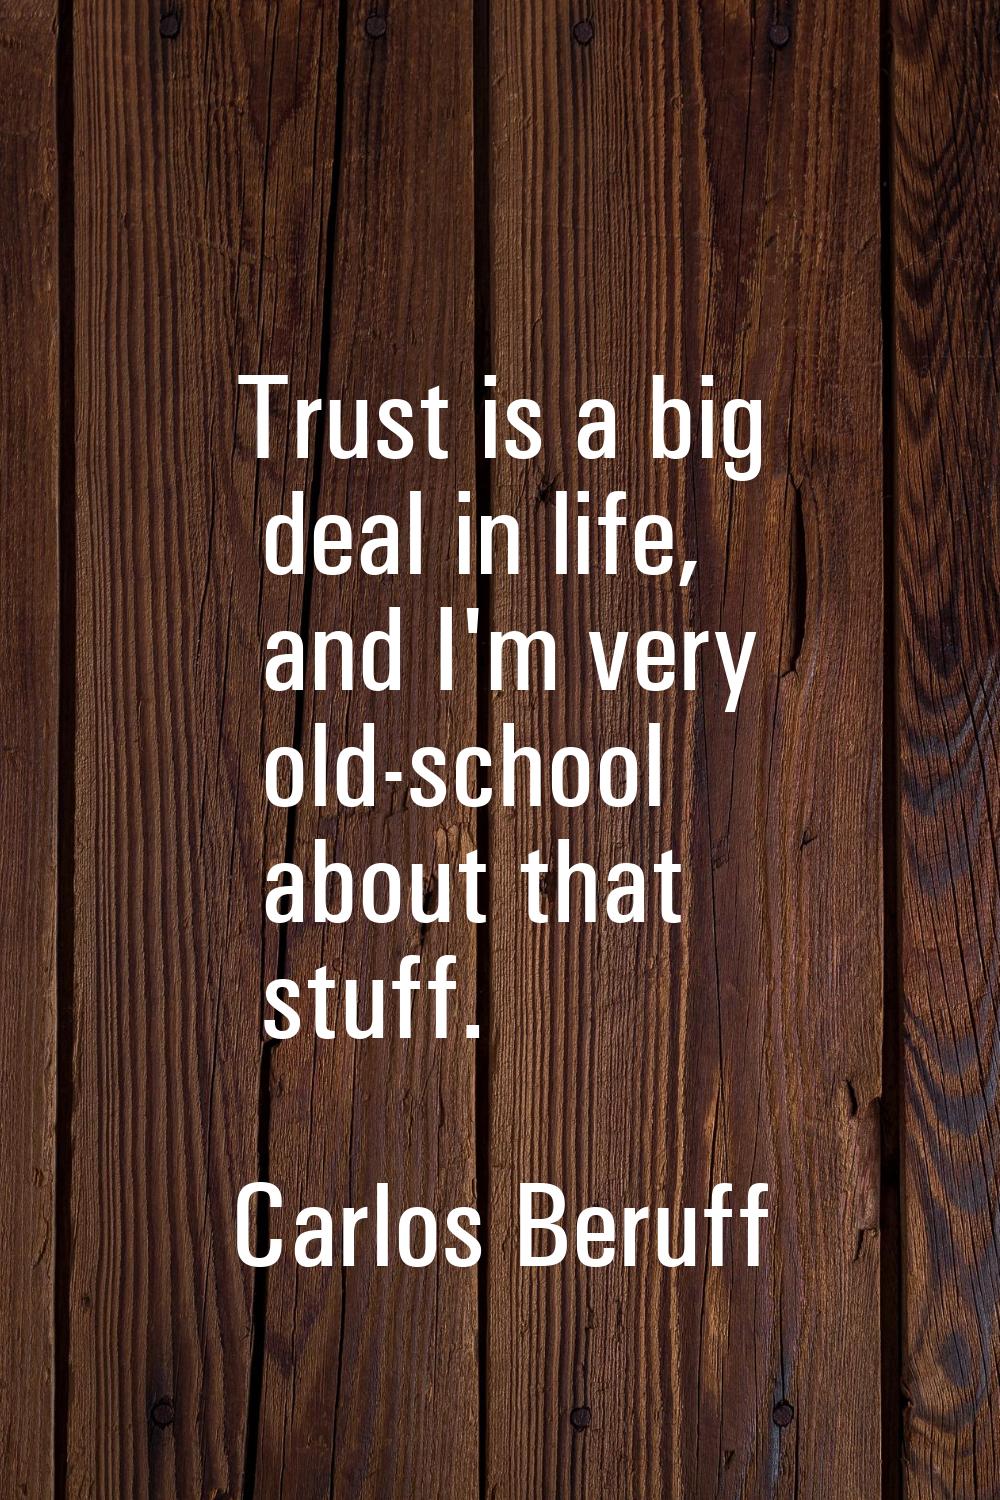 Trust is a big deal in life, and I'm very old-school about that stuff.